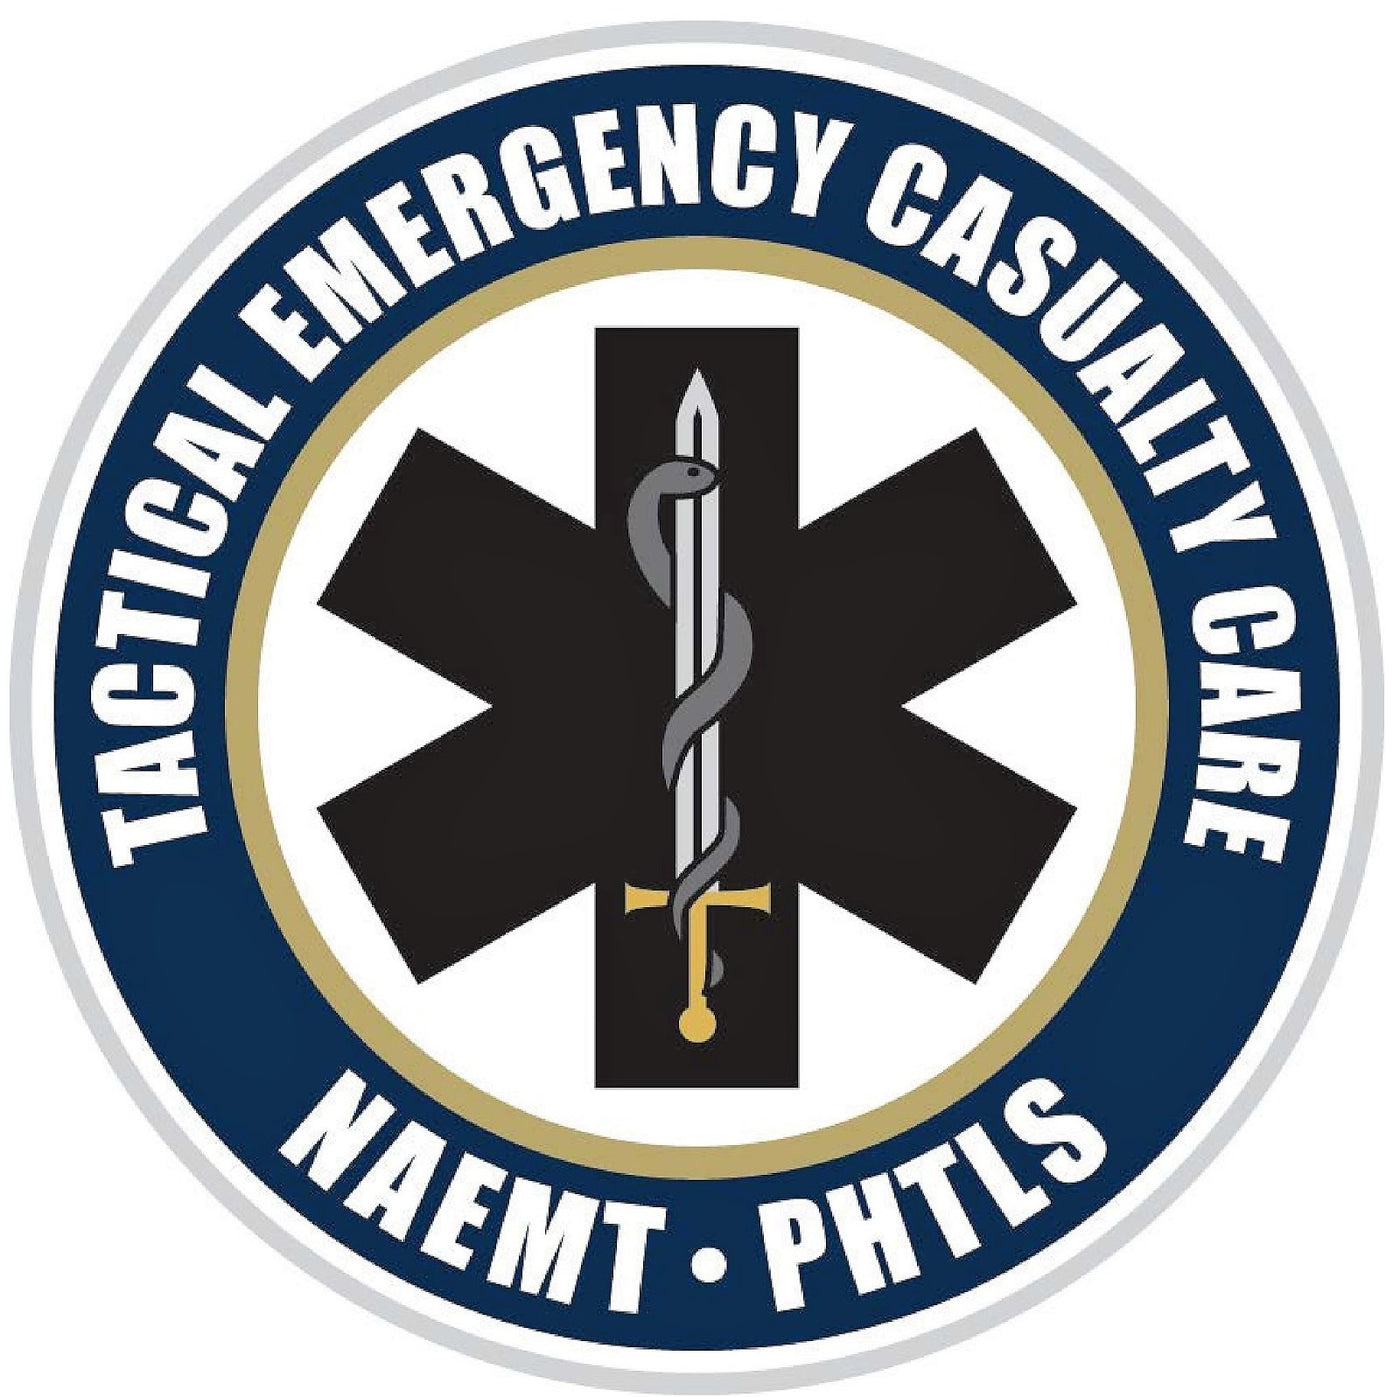 Tactical Emergency Casualty Care - Law Enforcement Officers and First Responders